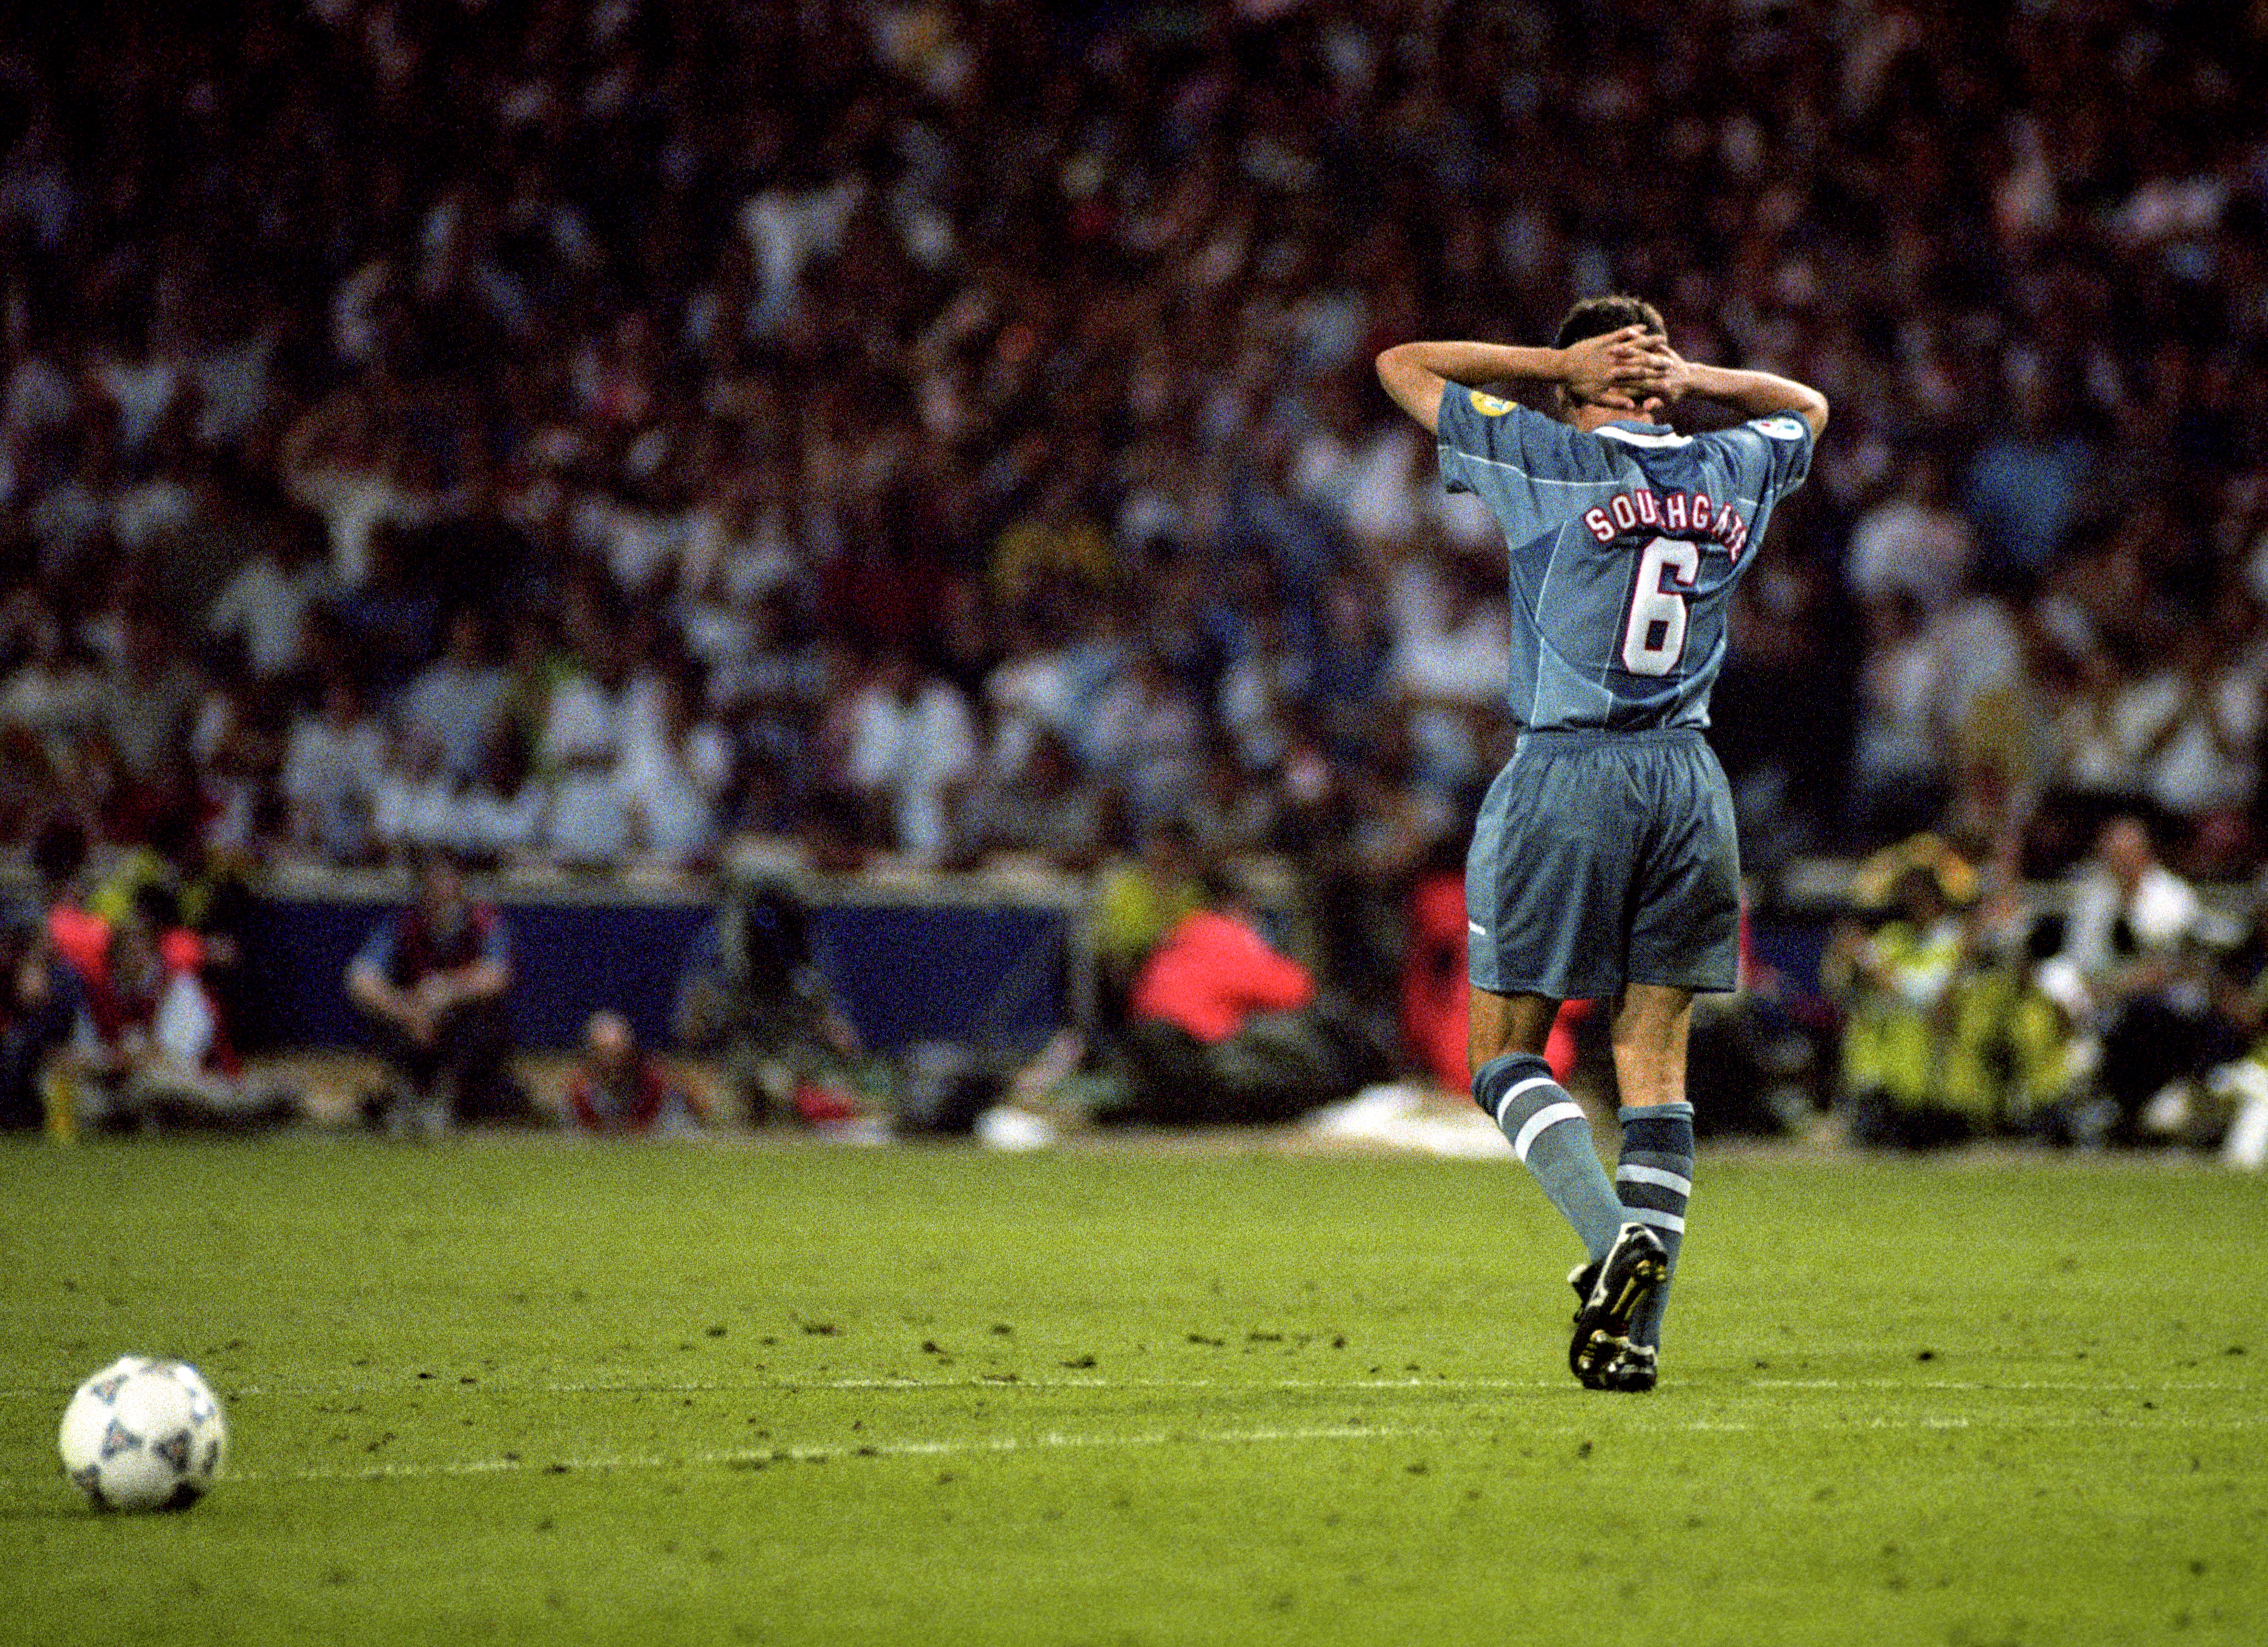 Gareth Southgate walks away after his penalty was saved against Germany (Neil Munns/PA)